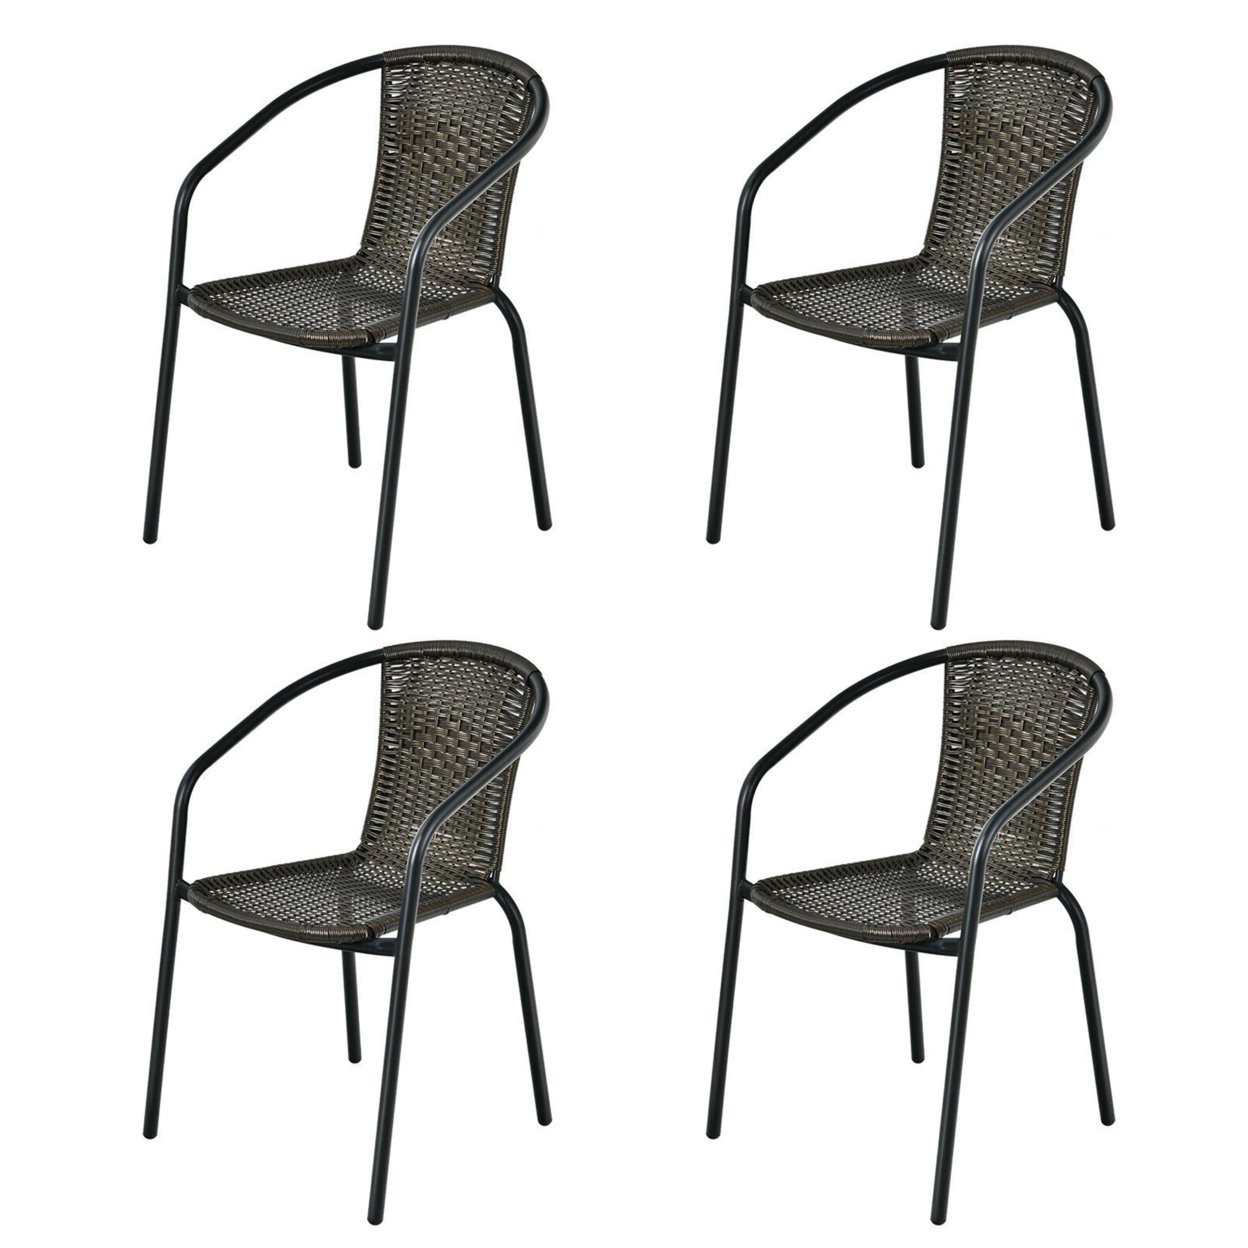 Gymax Patio Rattan Dining Chair Outdoor Stackable Armchair Yard Garden - Brown, 6 Pcs